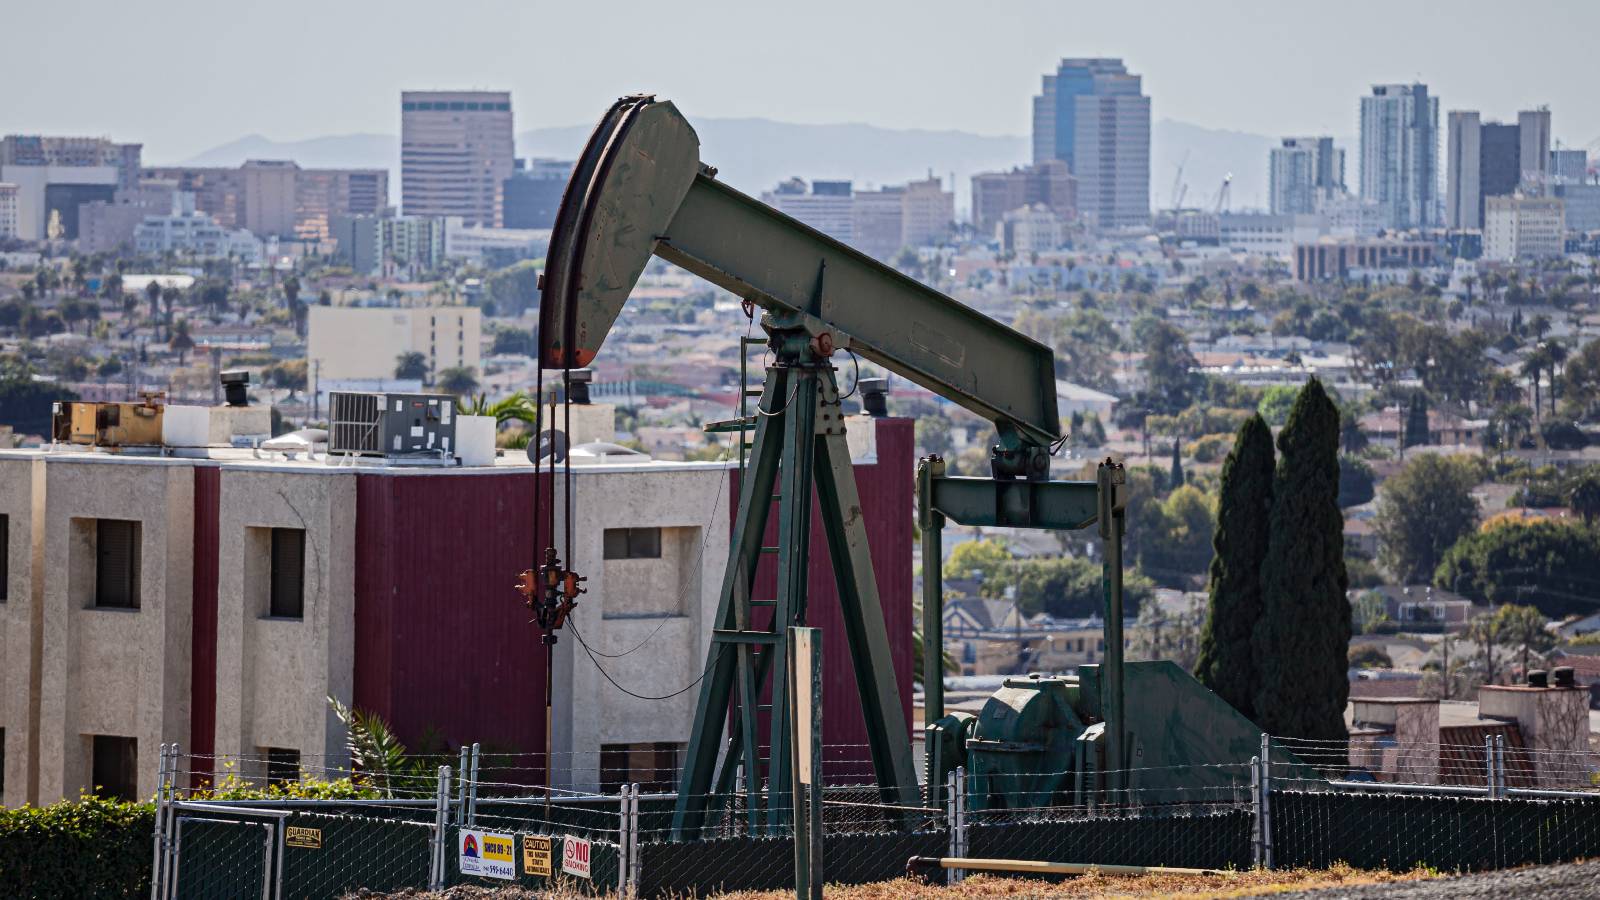 Oil well and pump jacks in the City of Signal Hill with the City of Long Beach in the background.